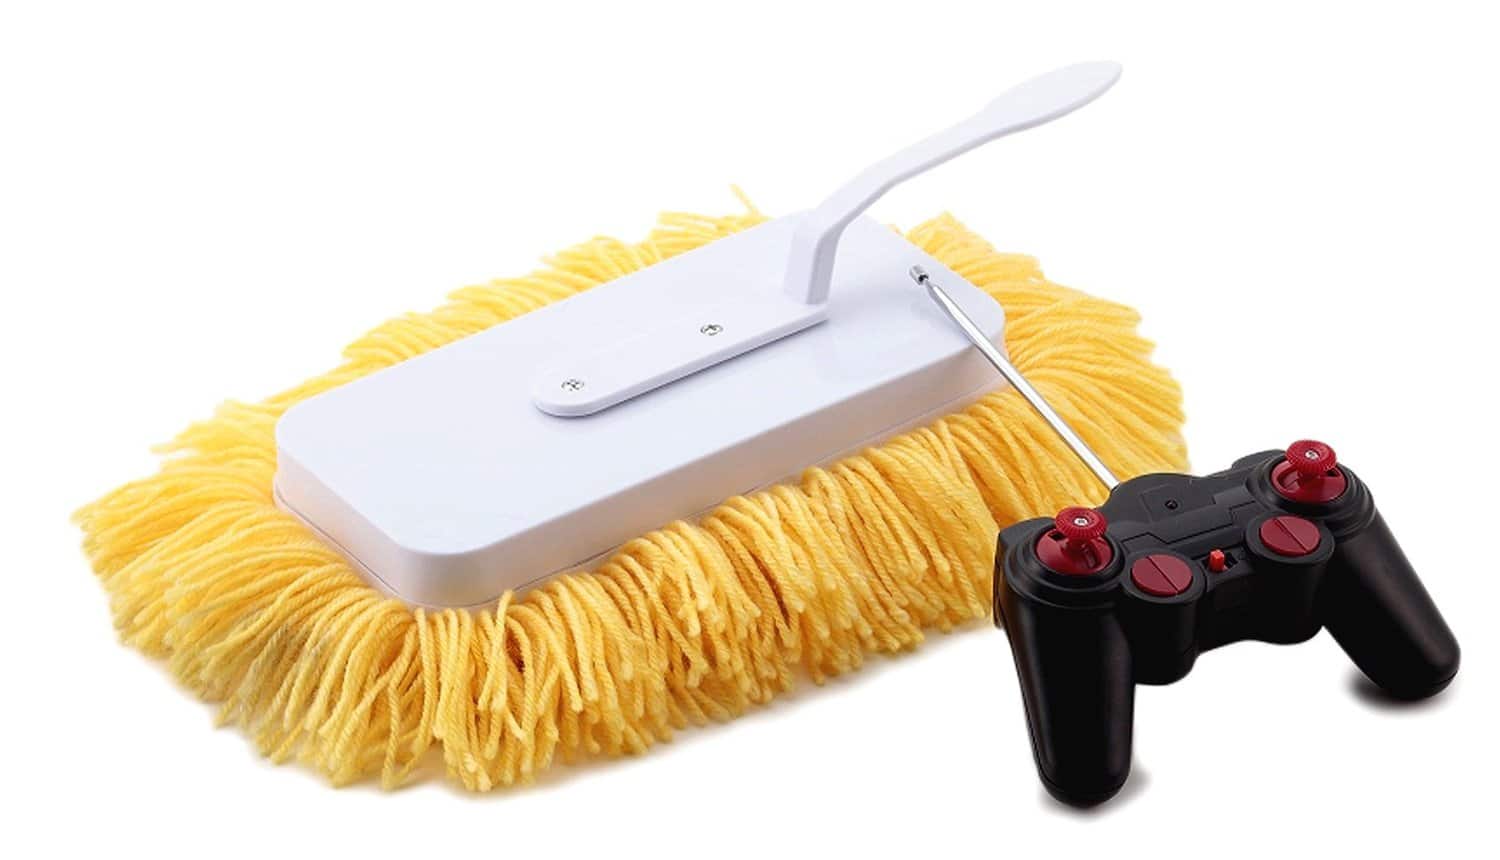 Remote Controlled Floor Mop Makes Even Gamers Feel Compelled To Clean